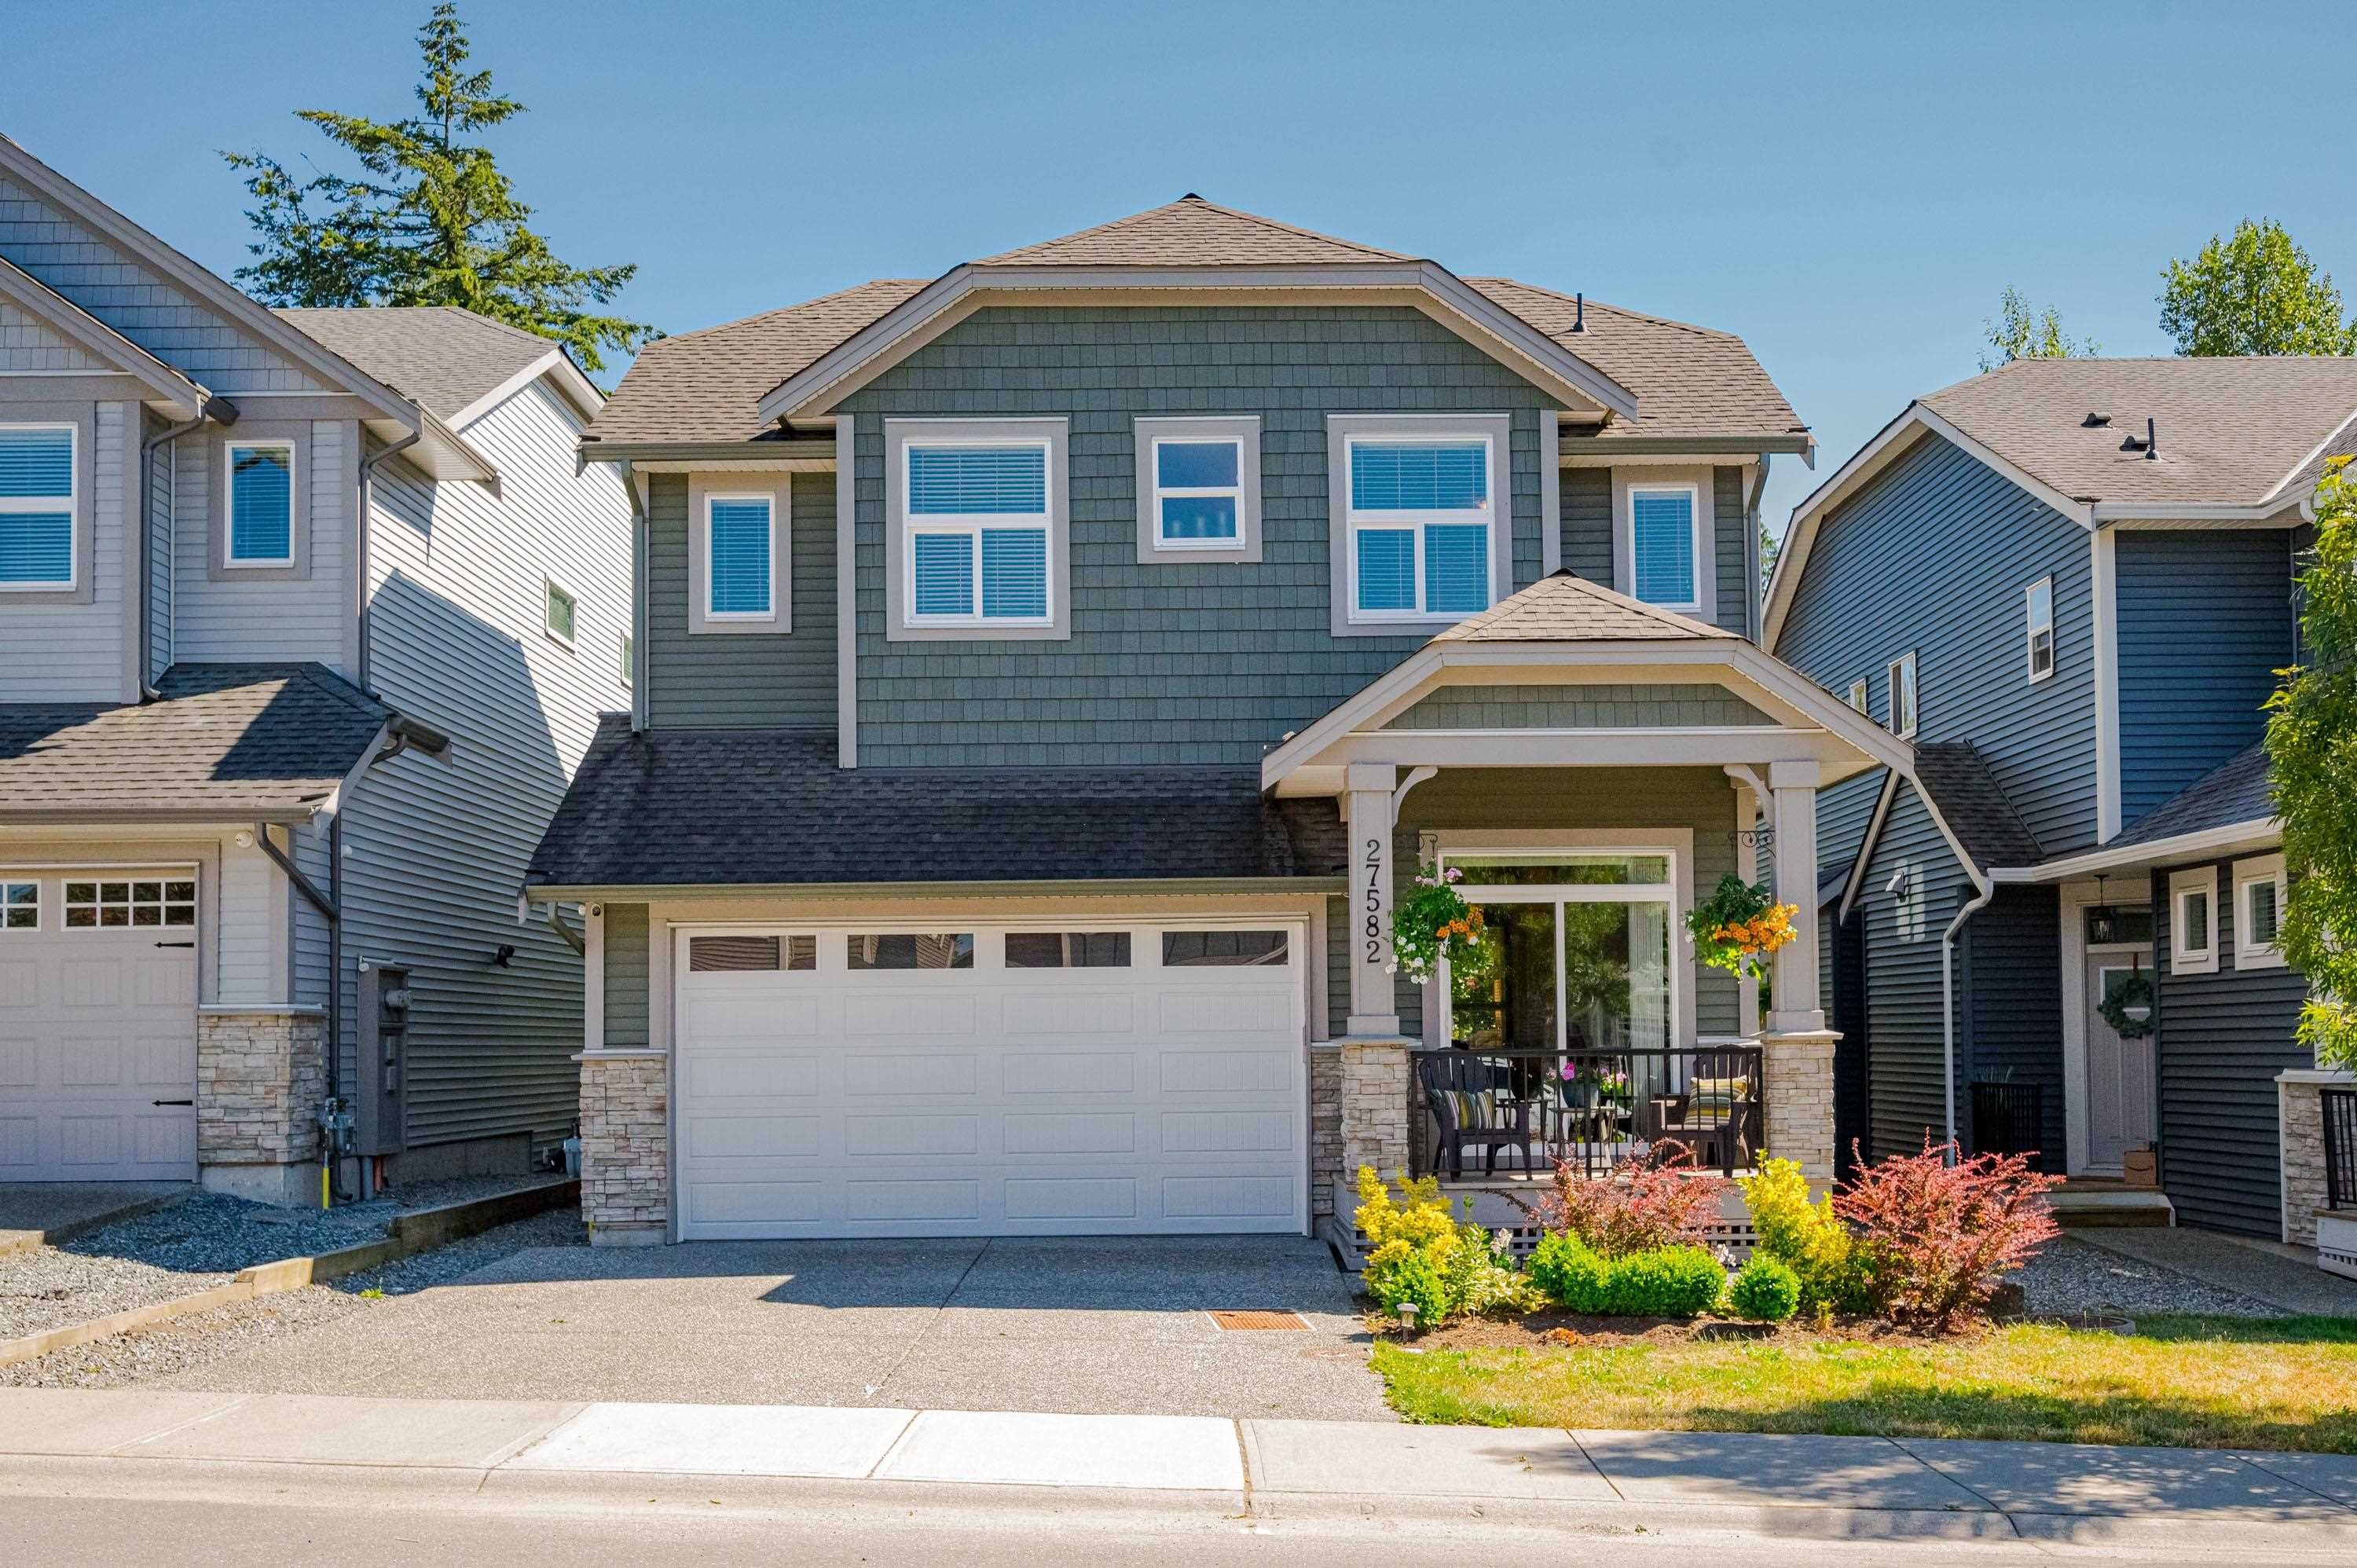 Welcome to 27582 - 27A Ave., Aldergrove, BC in sought-after Bertrand Estates!